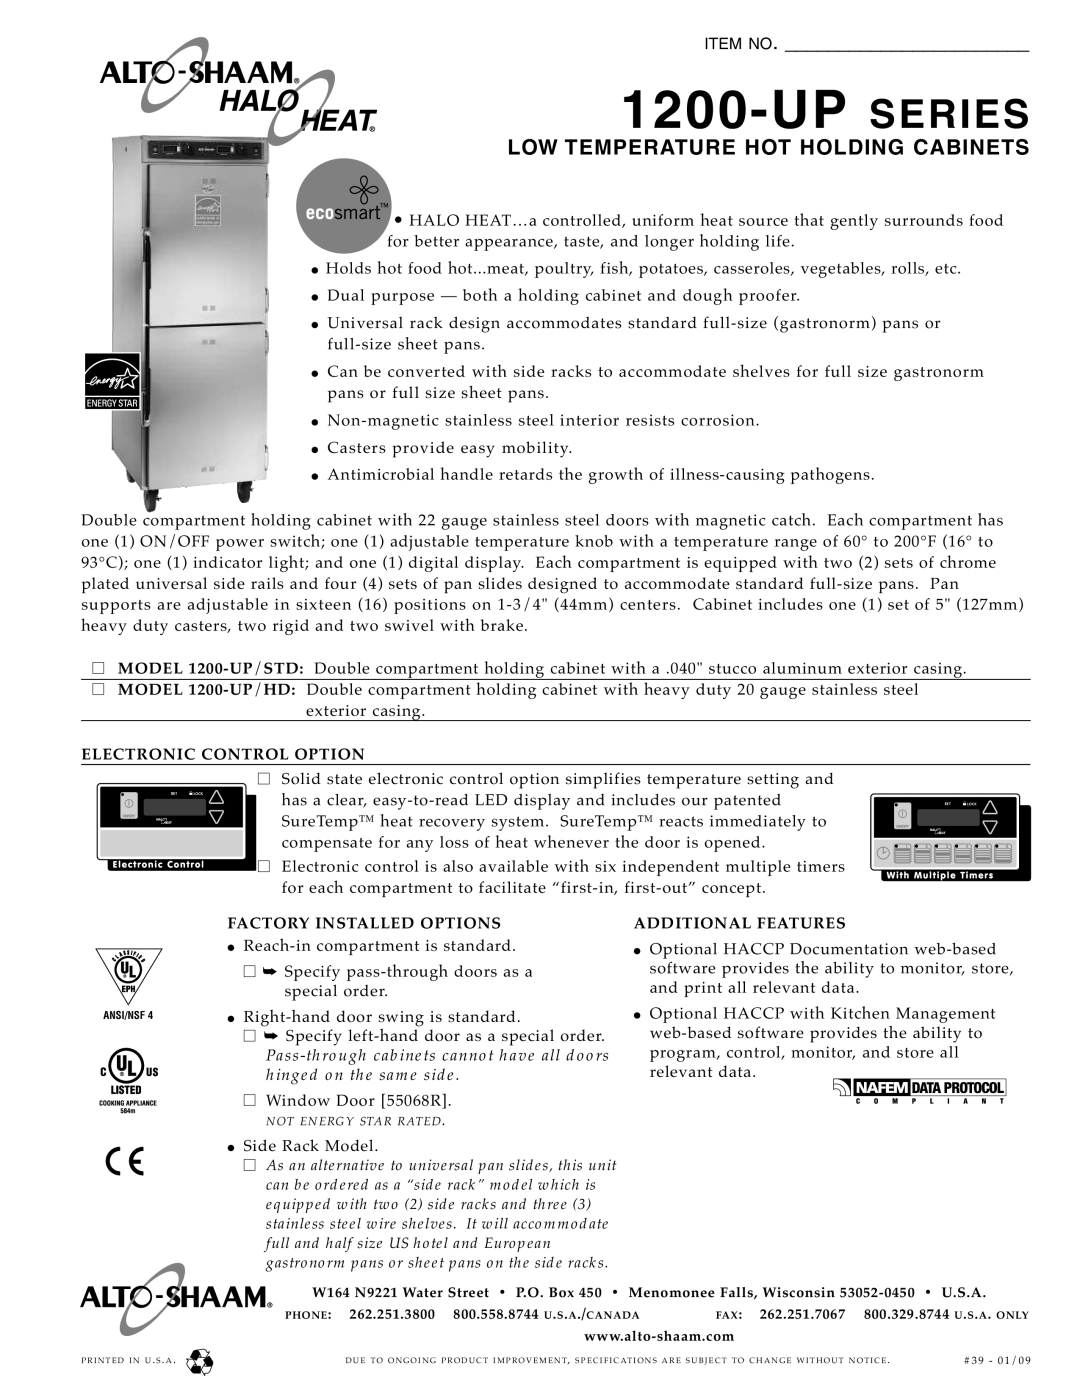 Alto-Shaam 1200-UP/HD specifications Up Series, Low Temperature Hot Holding Cabinets, Item No, MODEL 1200-UP/STD 